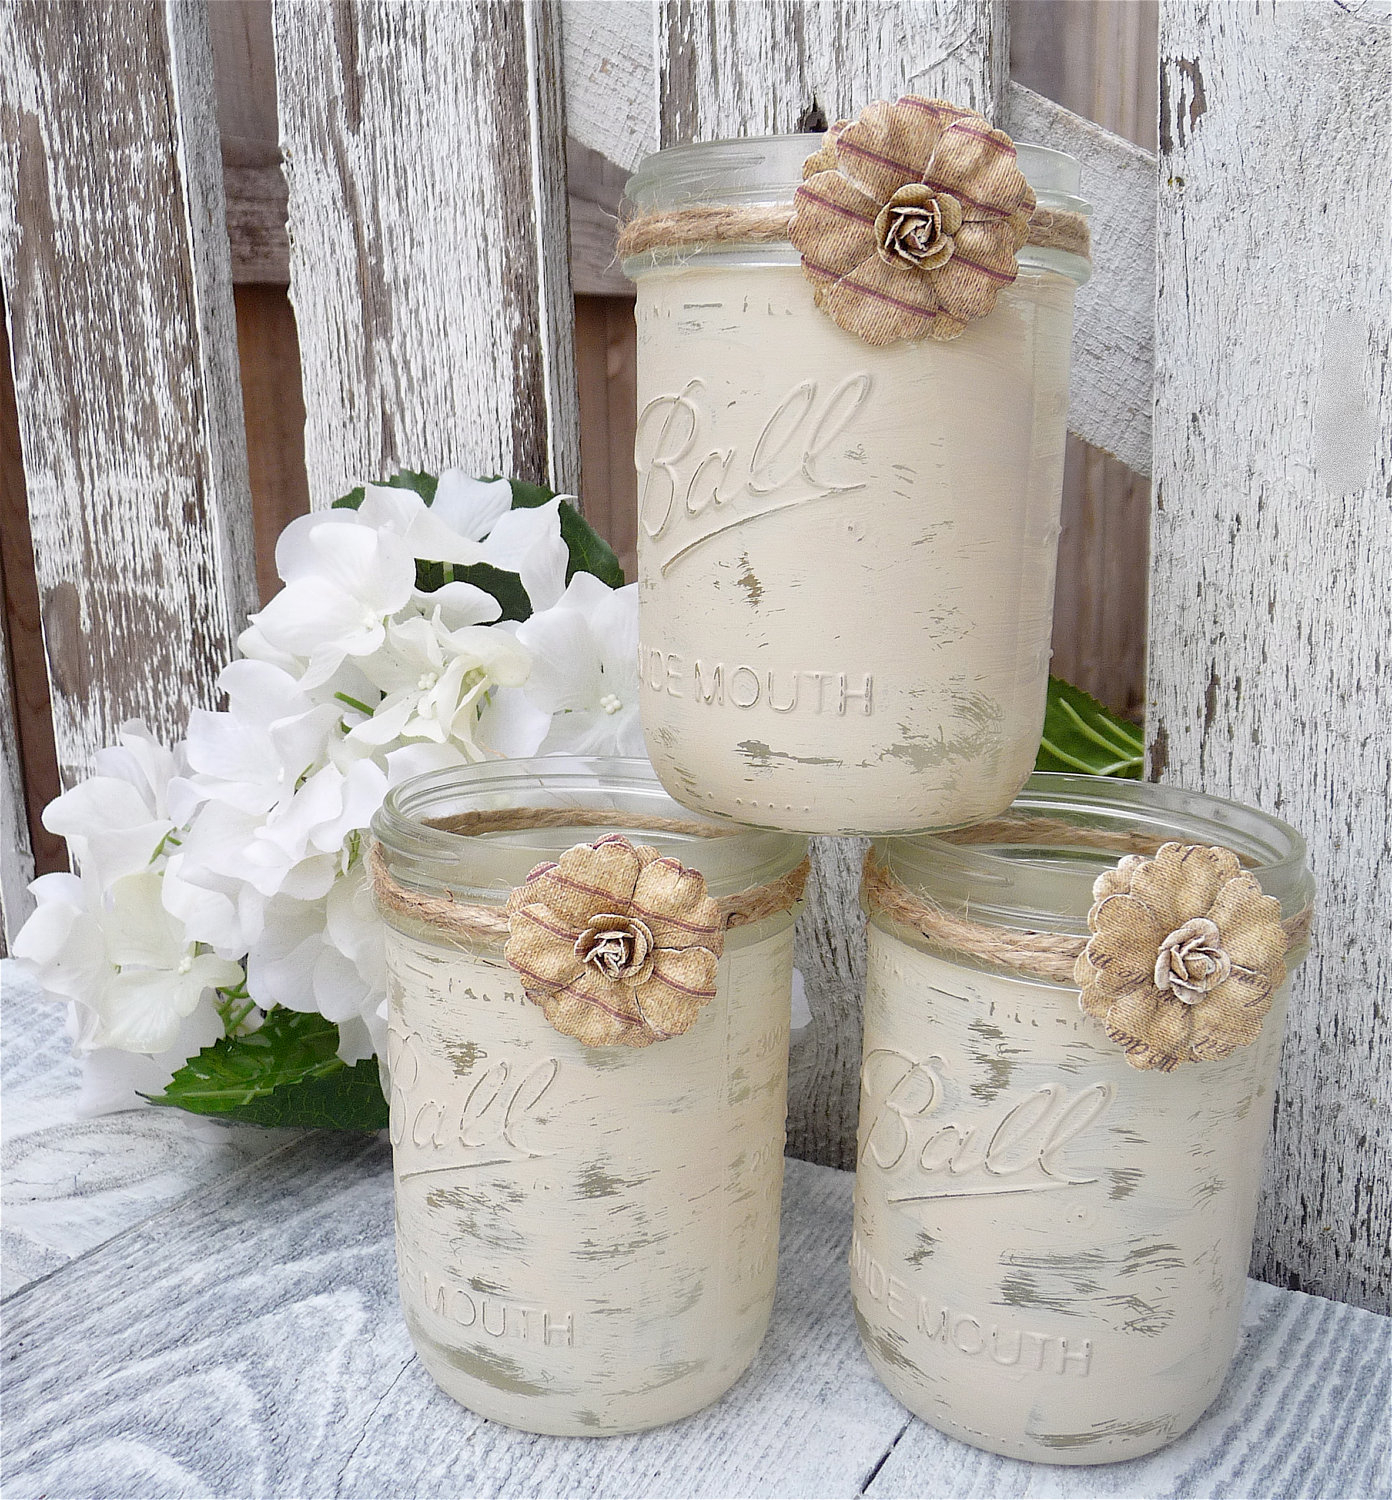 New Primitive French Country Chic MASON JAR LANTERN Candle Holder Shabby Rustic